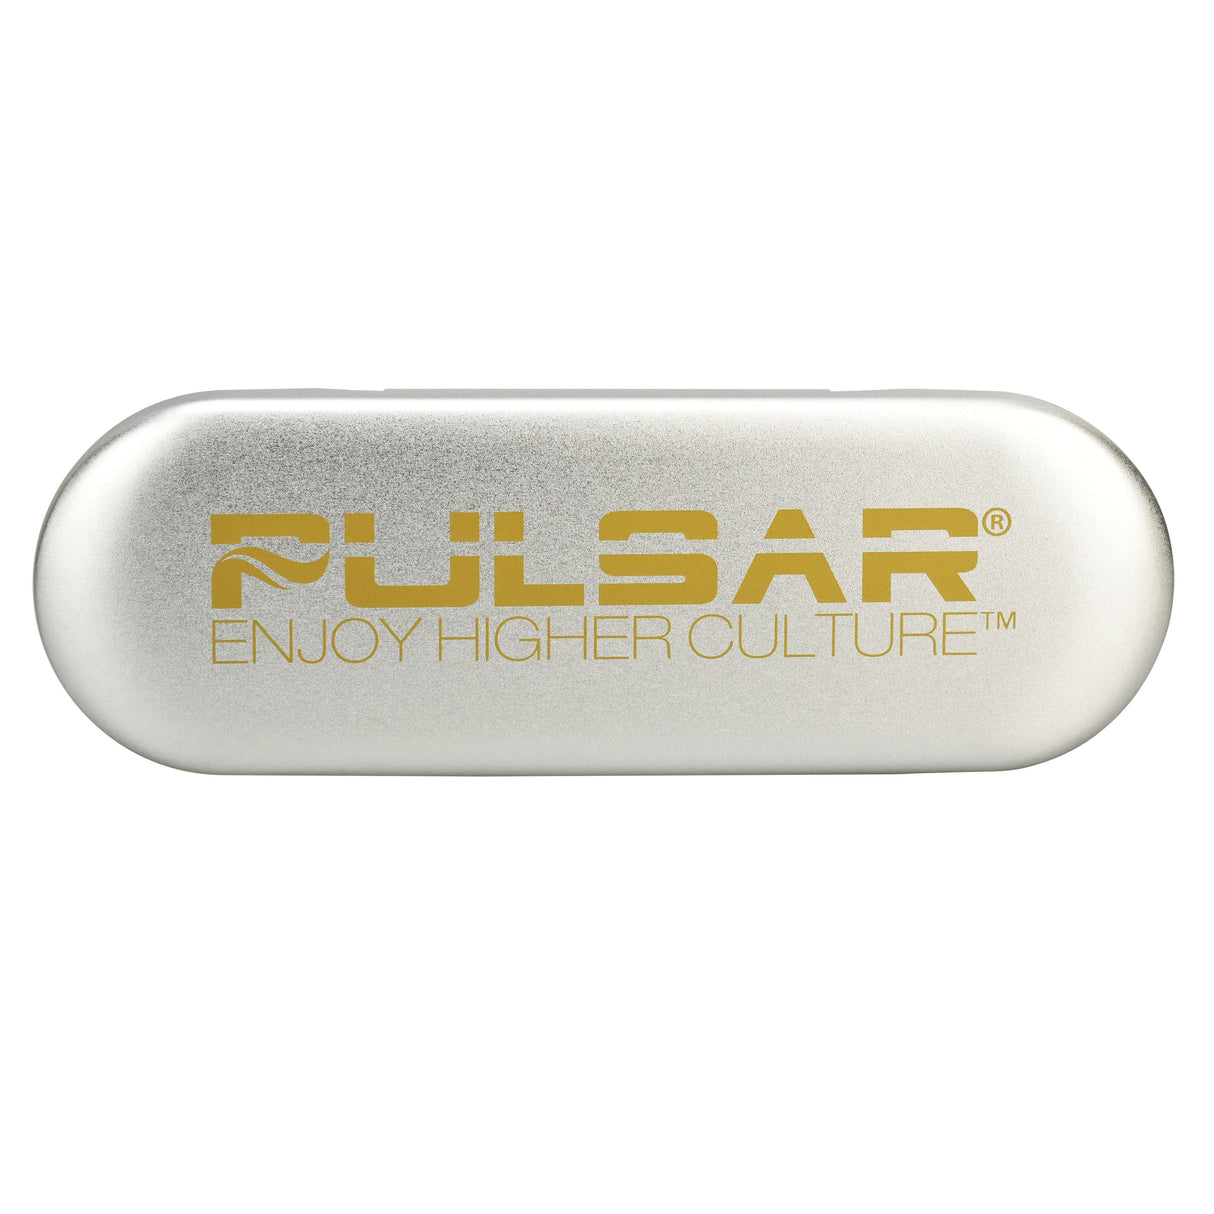 Pulsar Six Piece Dabber Tool Set in Hard Case - Top View with Brand Logo